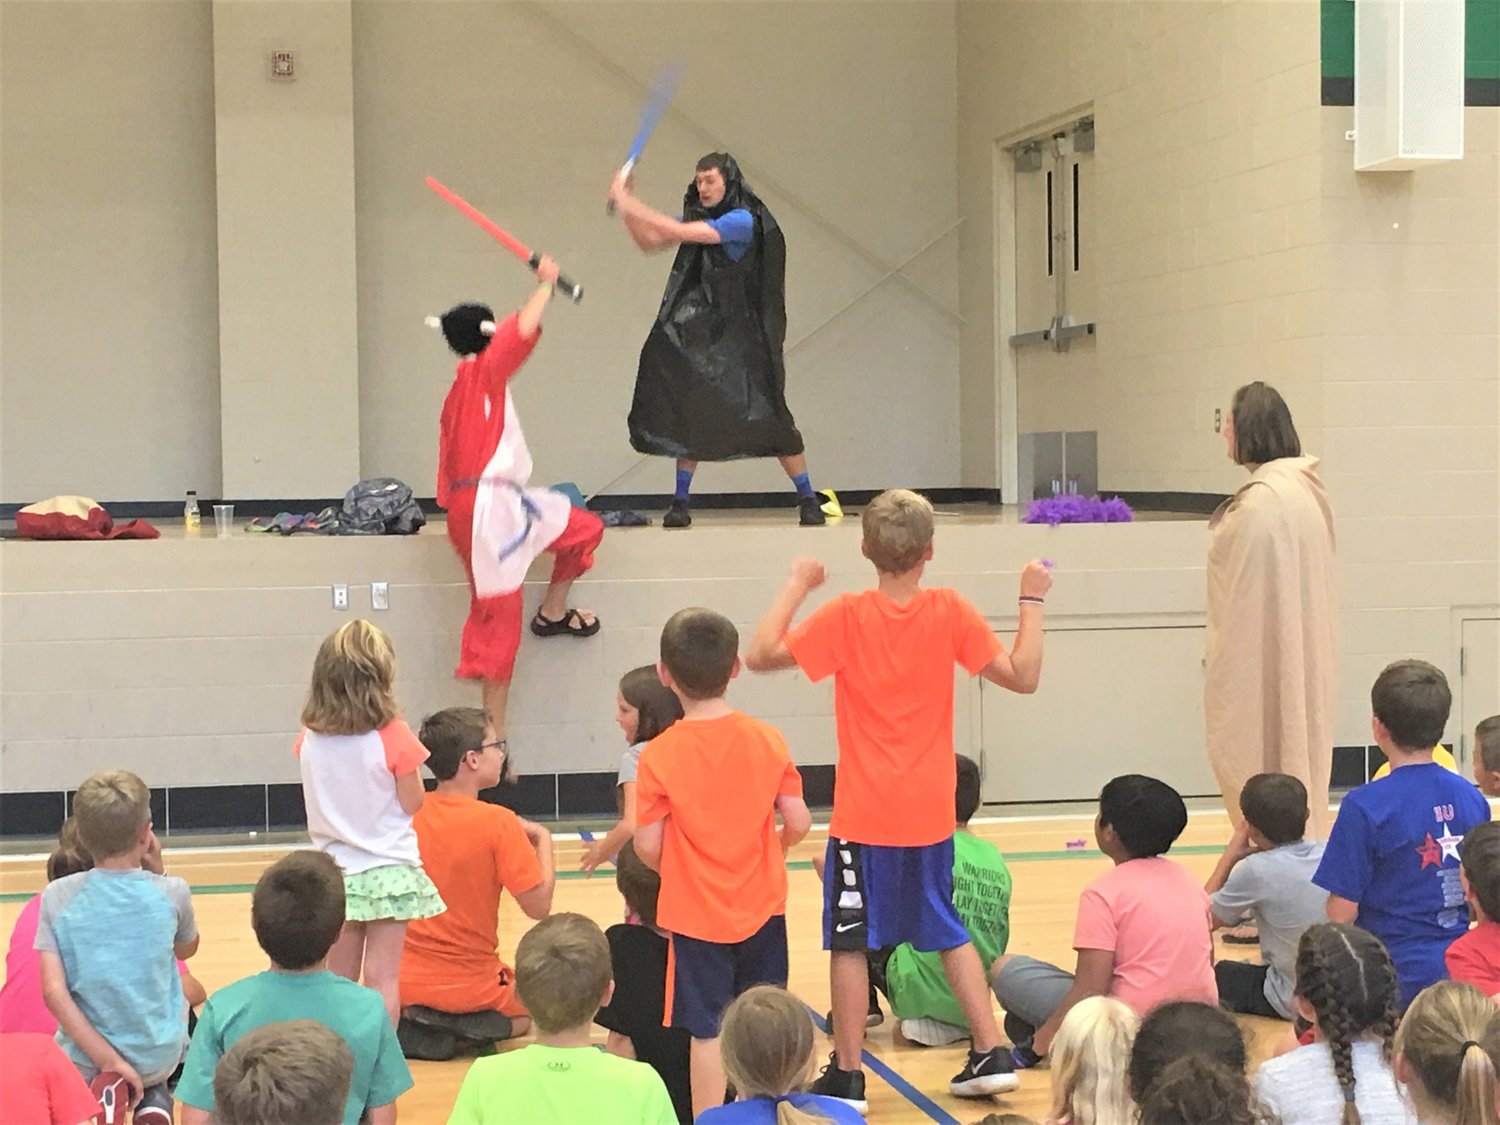 Children of Ss. Peter & Paul in Boonville and surrounding parishes watch teenagers clash with light sabers this summer during Totus Tuus, a weeklong, parish-based summer experience for Catholic youth.